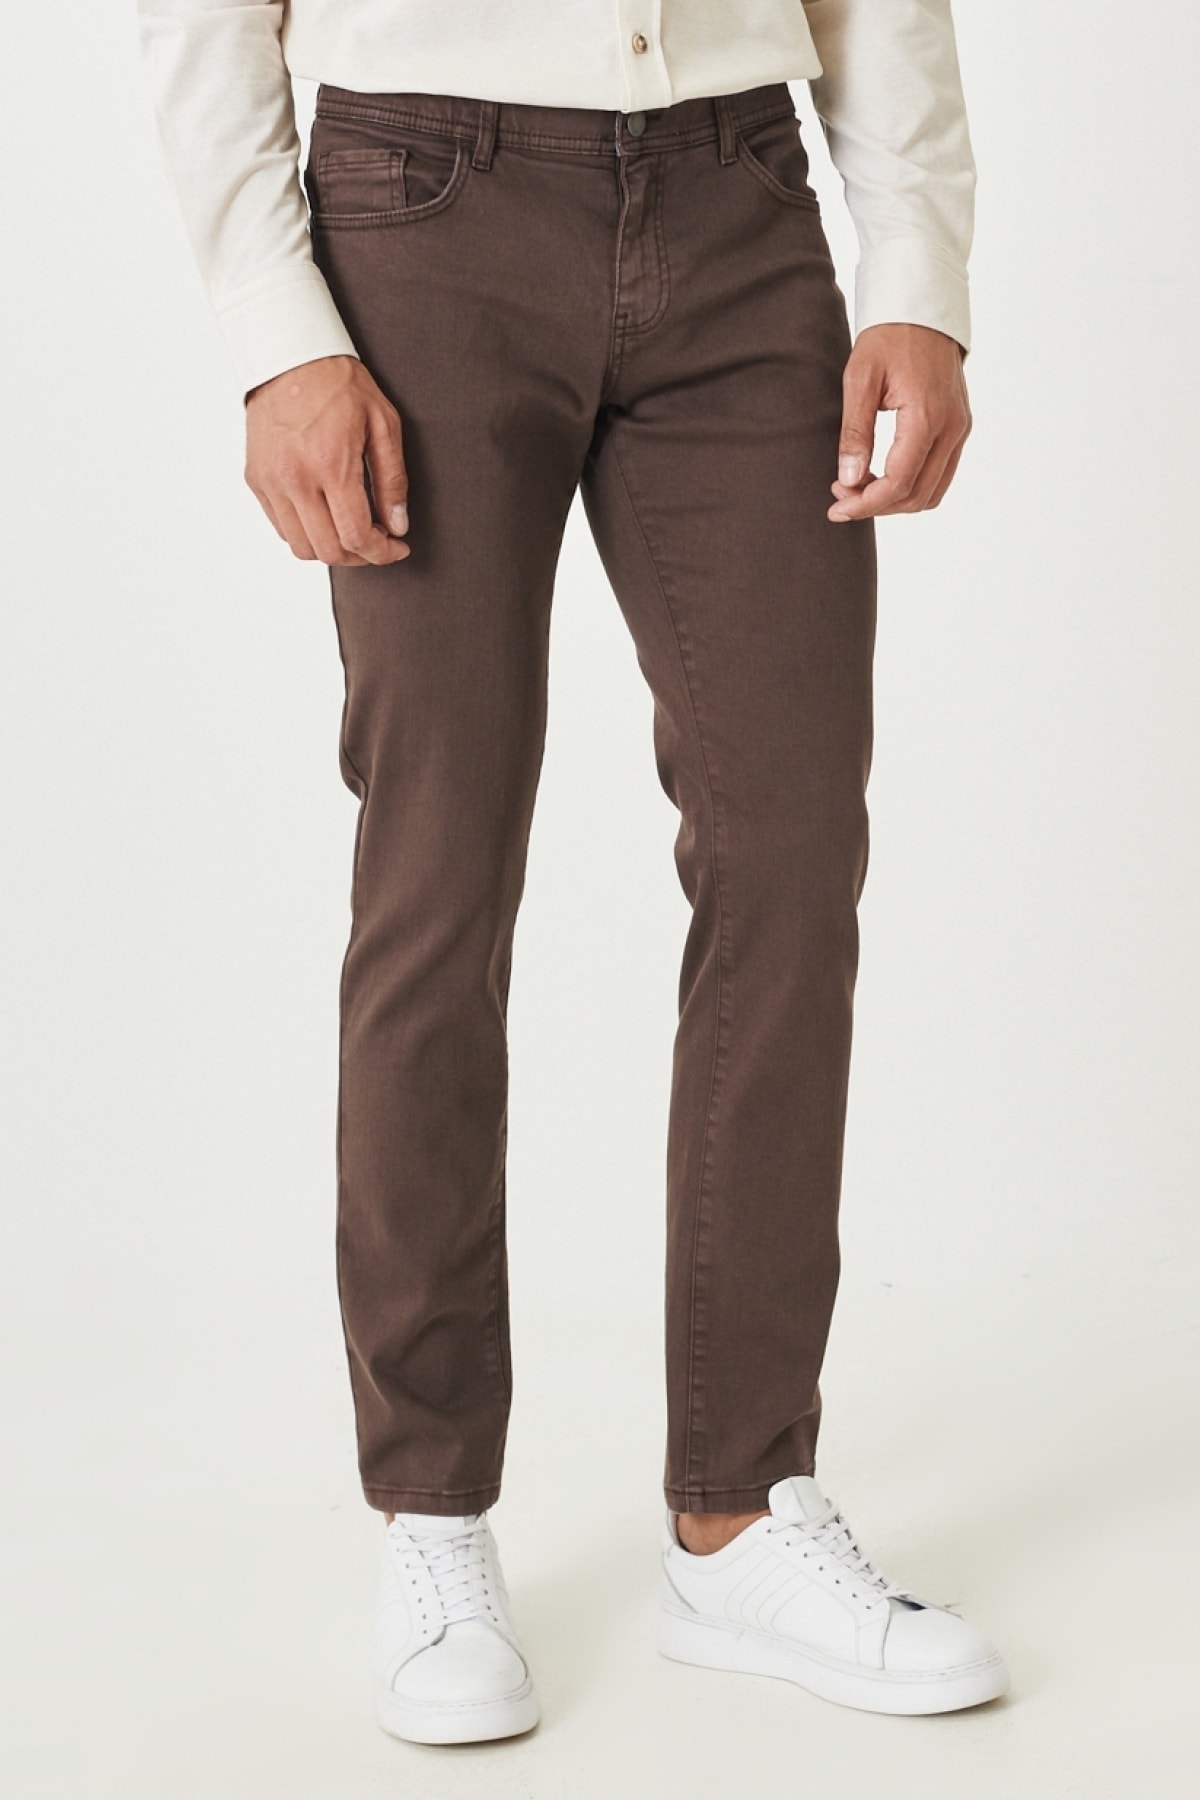 ALTINYILDIZ CLASSICS Men's Brown Casual Slim Fit Slim-fit Pants that Stretch 360 Degrees in All Directions.